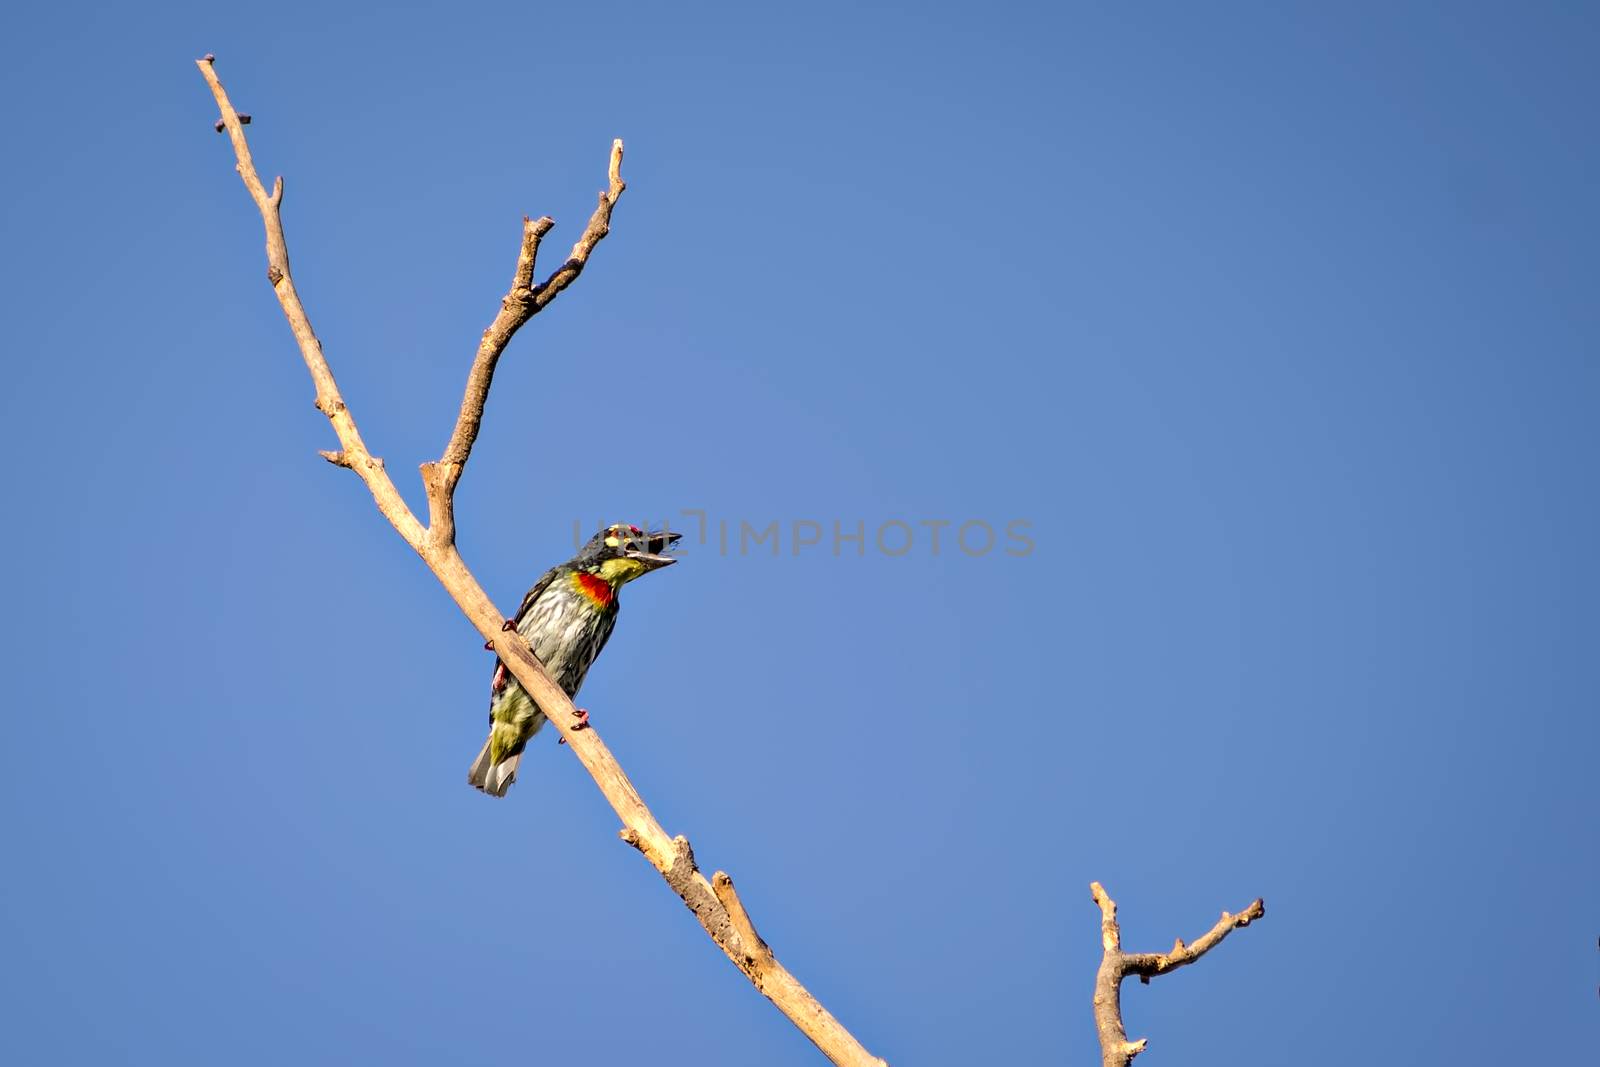 Isolated image of shouting copper smith barbet bird, sitting on a dry tree branch. by lalam